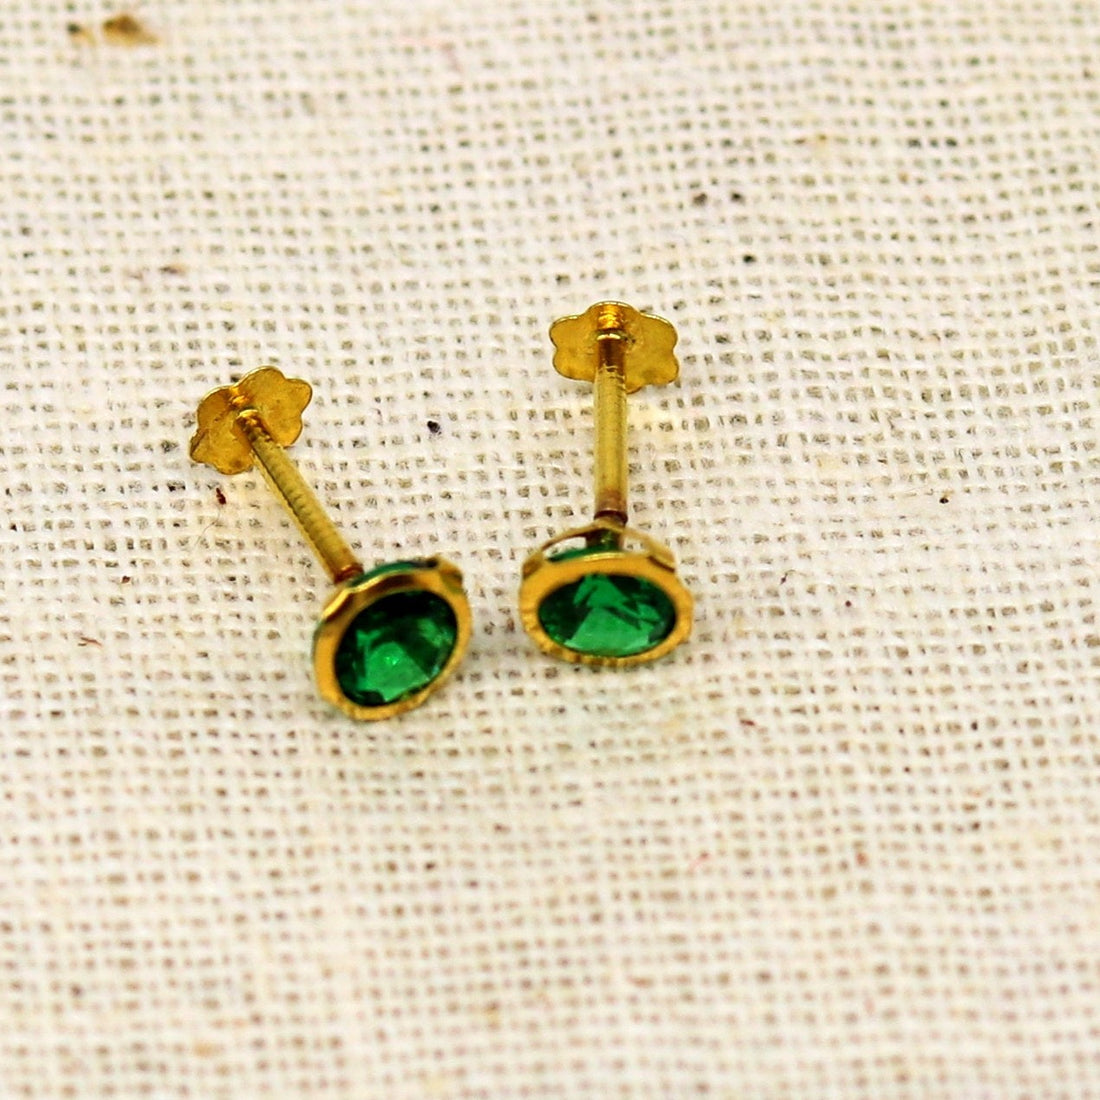 4.2mm 18k yellow gold handmade fabulous green cubic zircon stone excellent antique vintage design stud earrings pair unisex jewelry er113 - TRIBAL ORNAMENTS